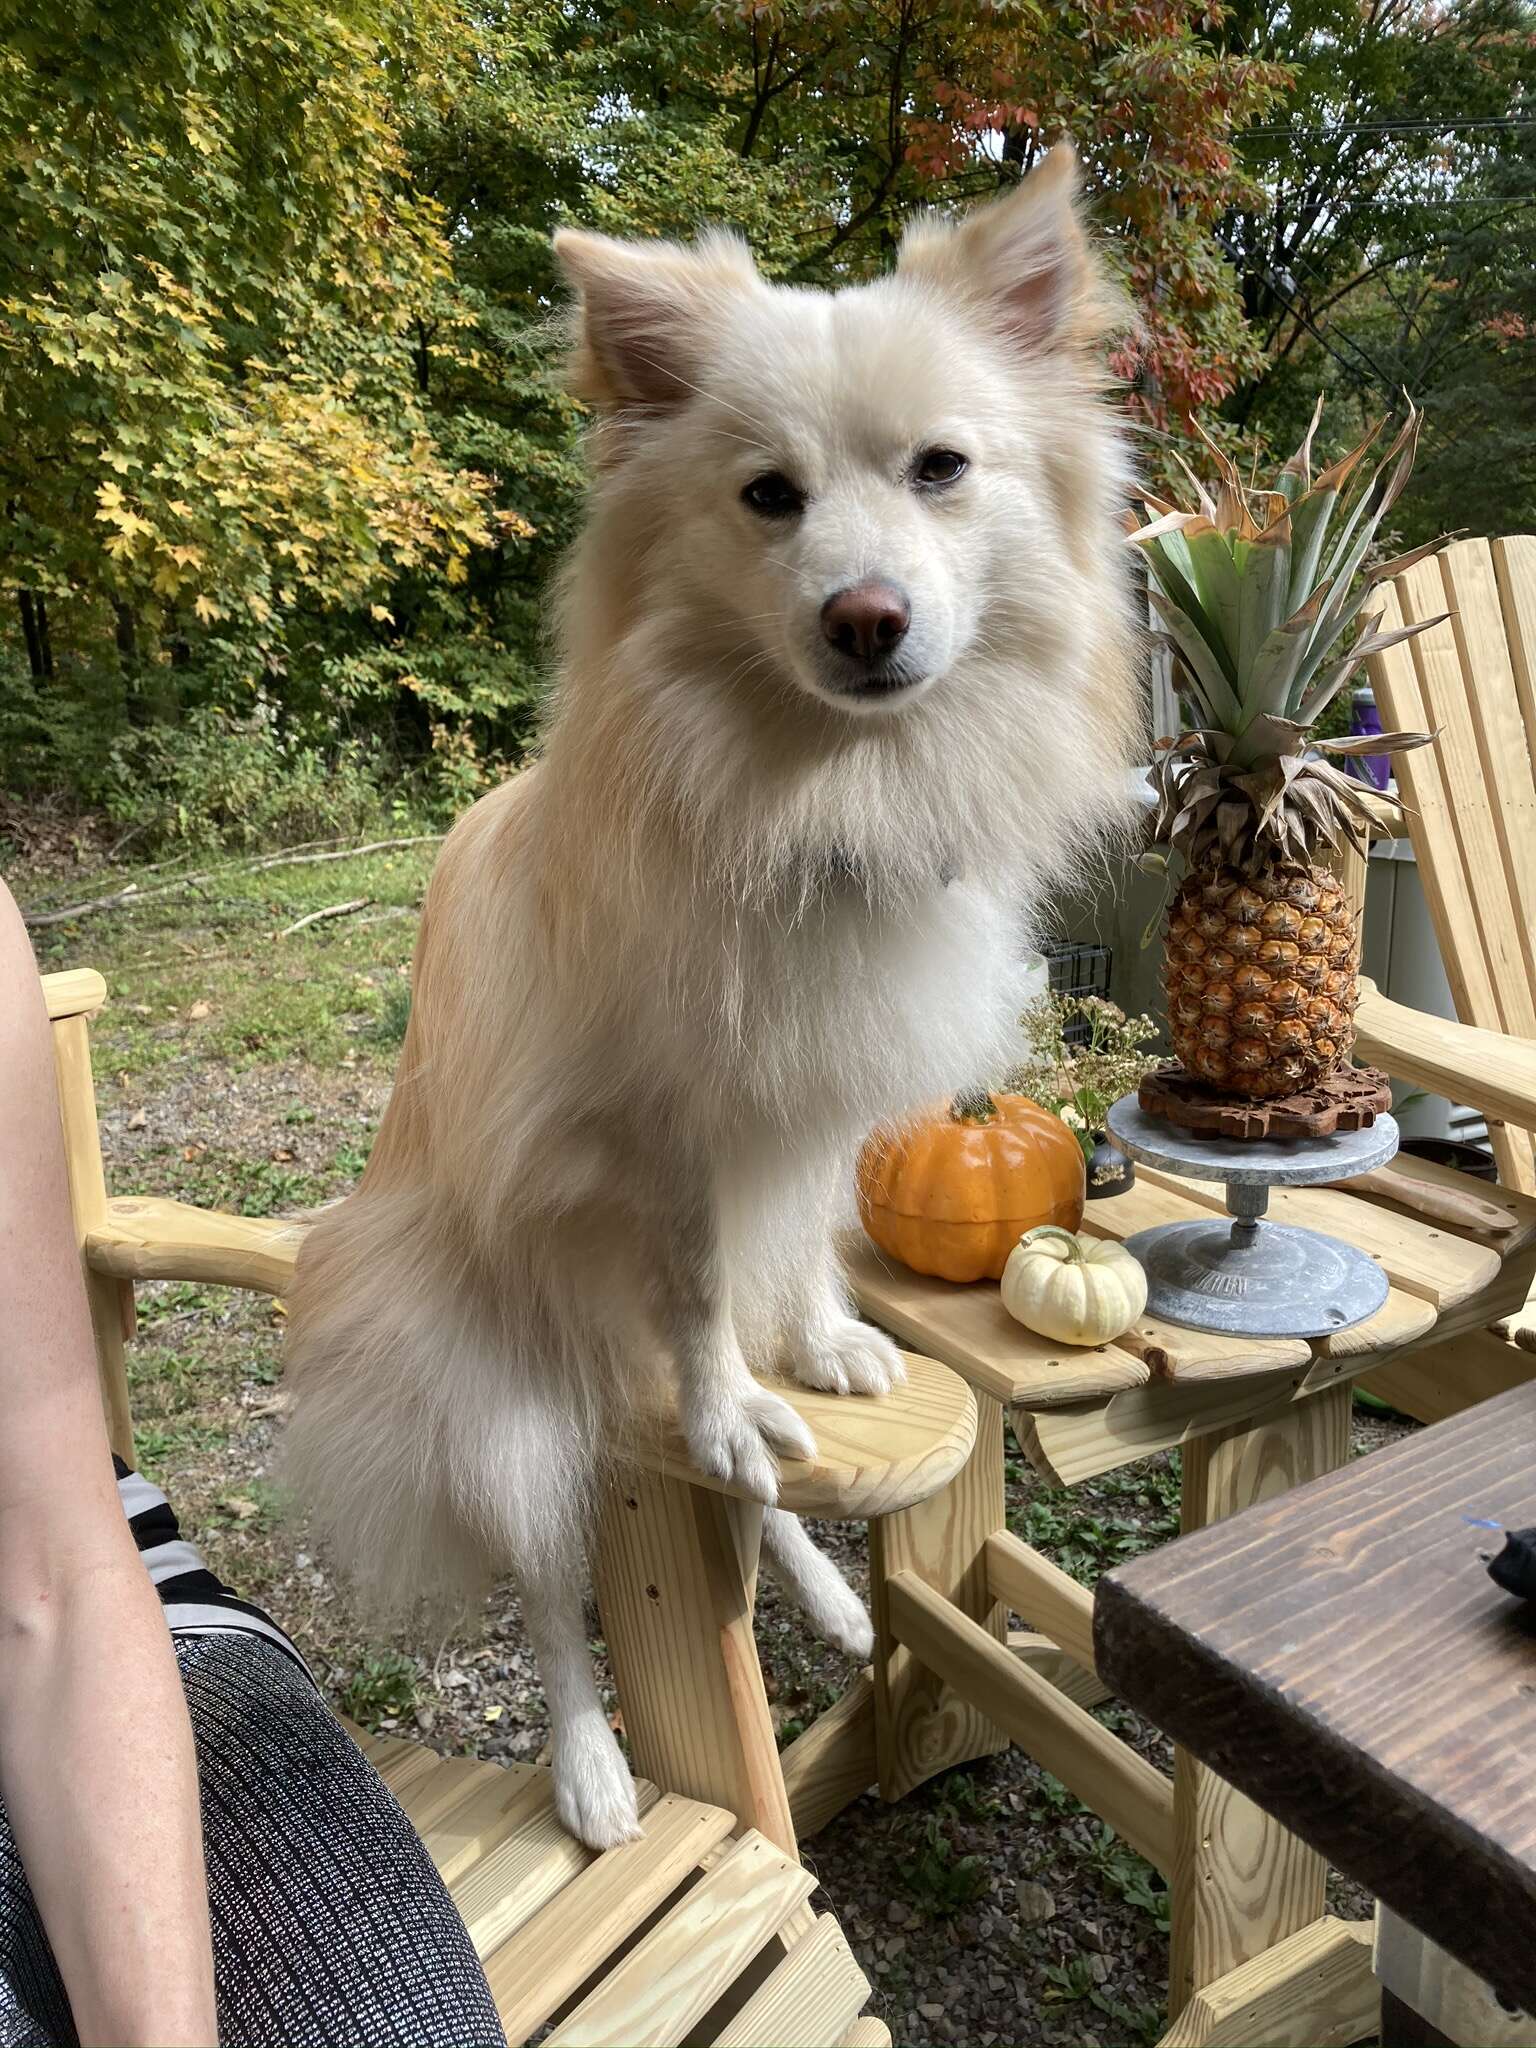 White dog stands with two feet on table.